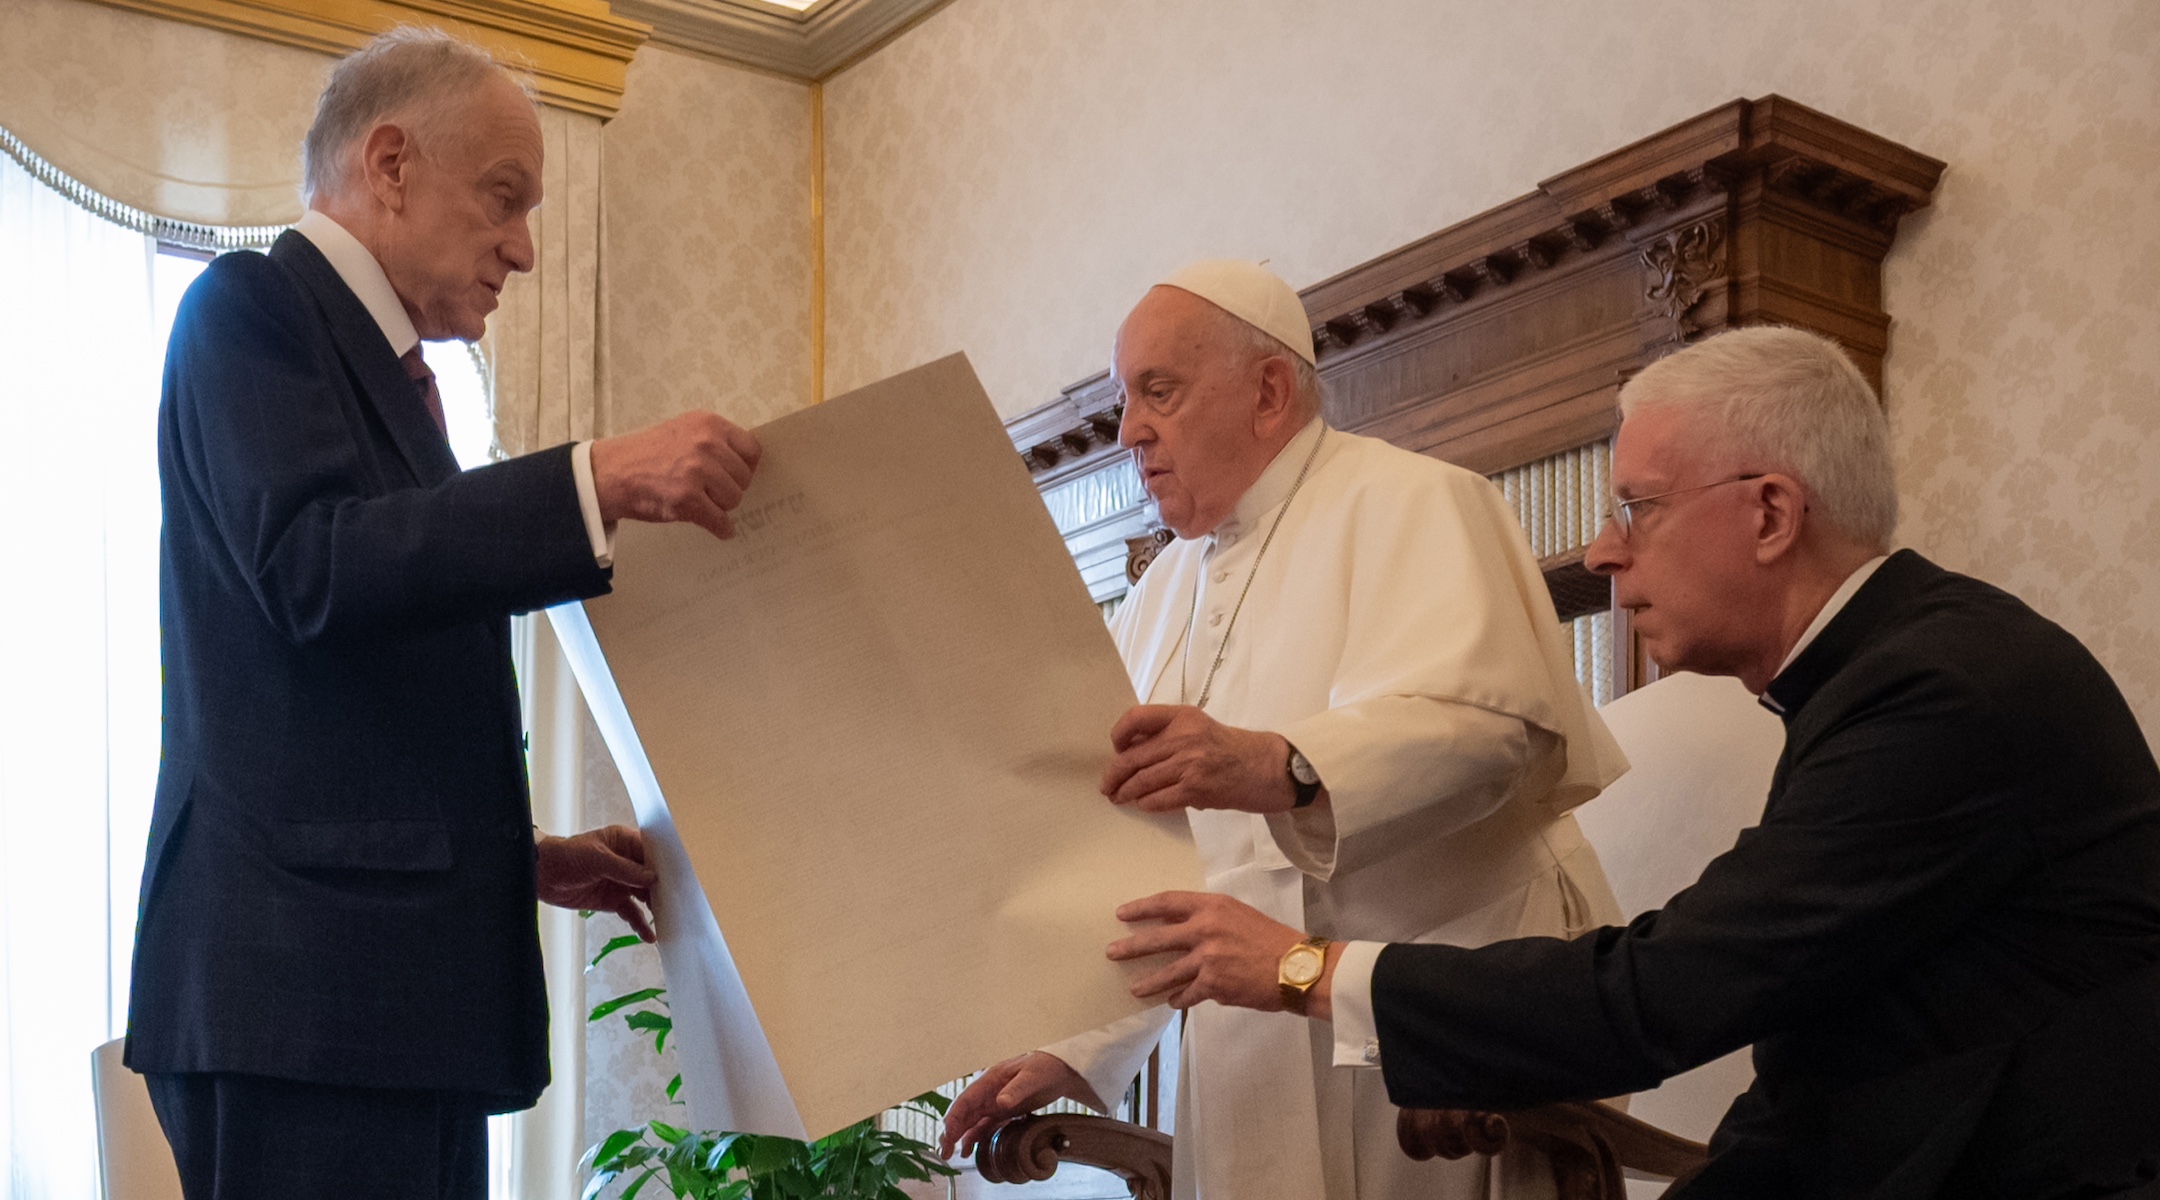 World Jewish Congress President Ronald Lauder gives Pope Francis the “Kishreinu” (Hebrew for “Our Bond”) document acknowledging the influence of the Catholic Church’s 58-year-old Nostra Aetate declaration on Catholic-Jewish relations, Oct. 19, 2023. (Shahar Azran/WJC)